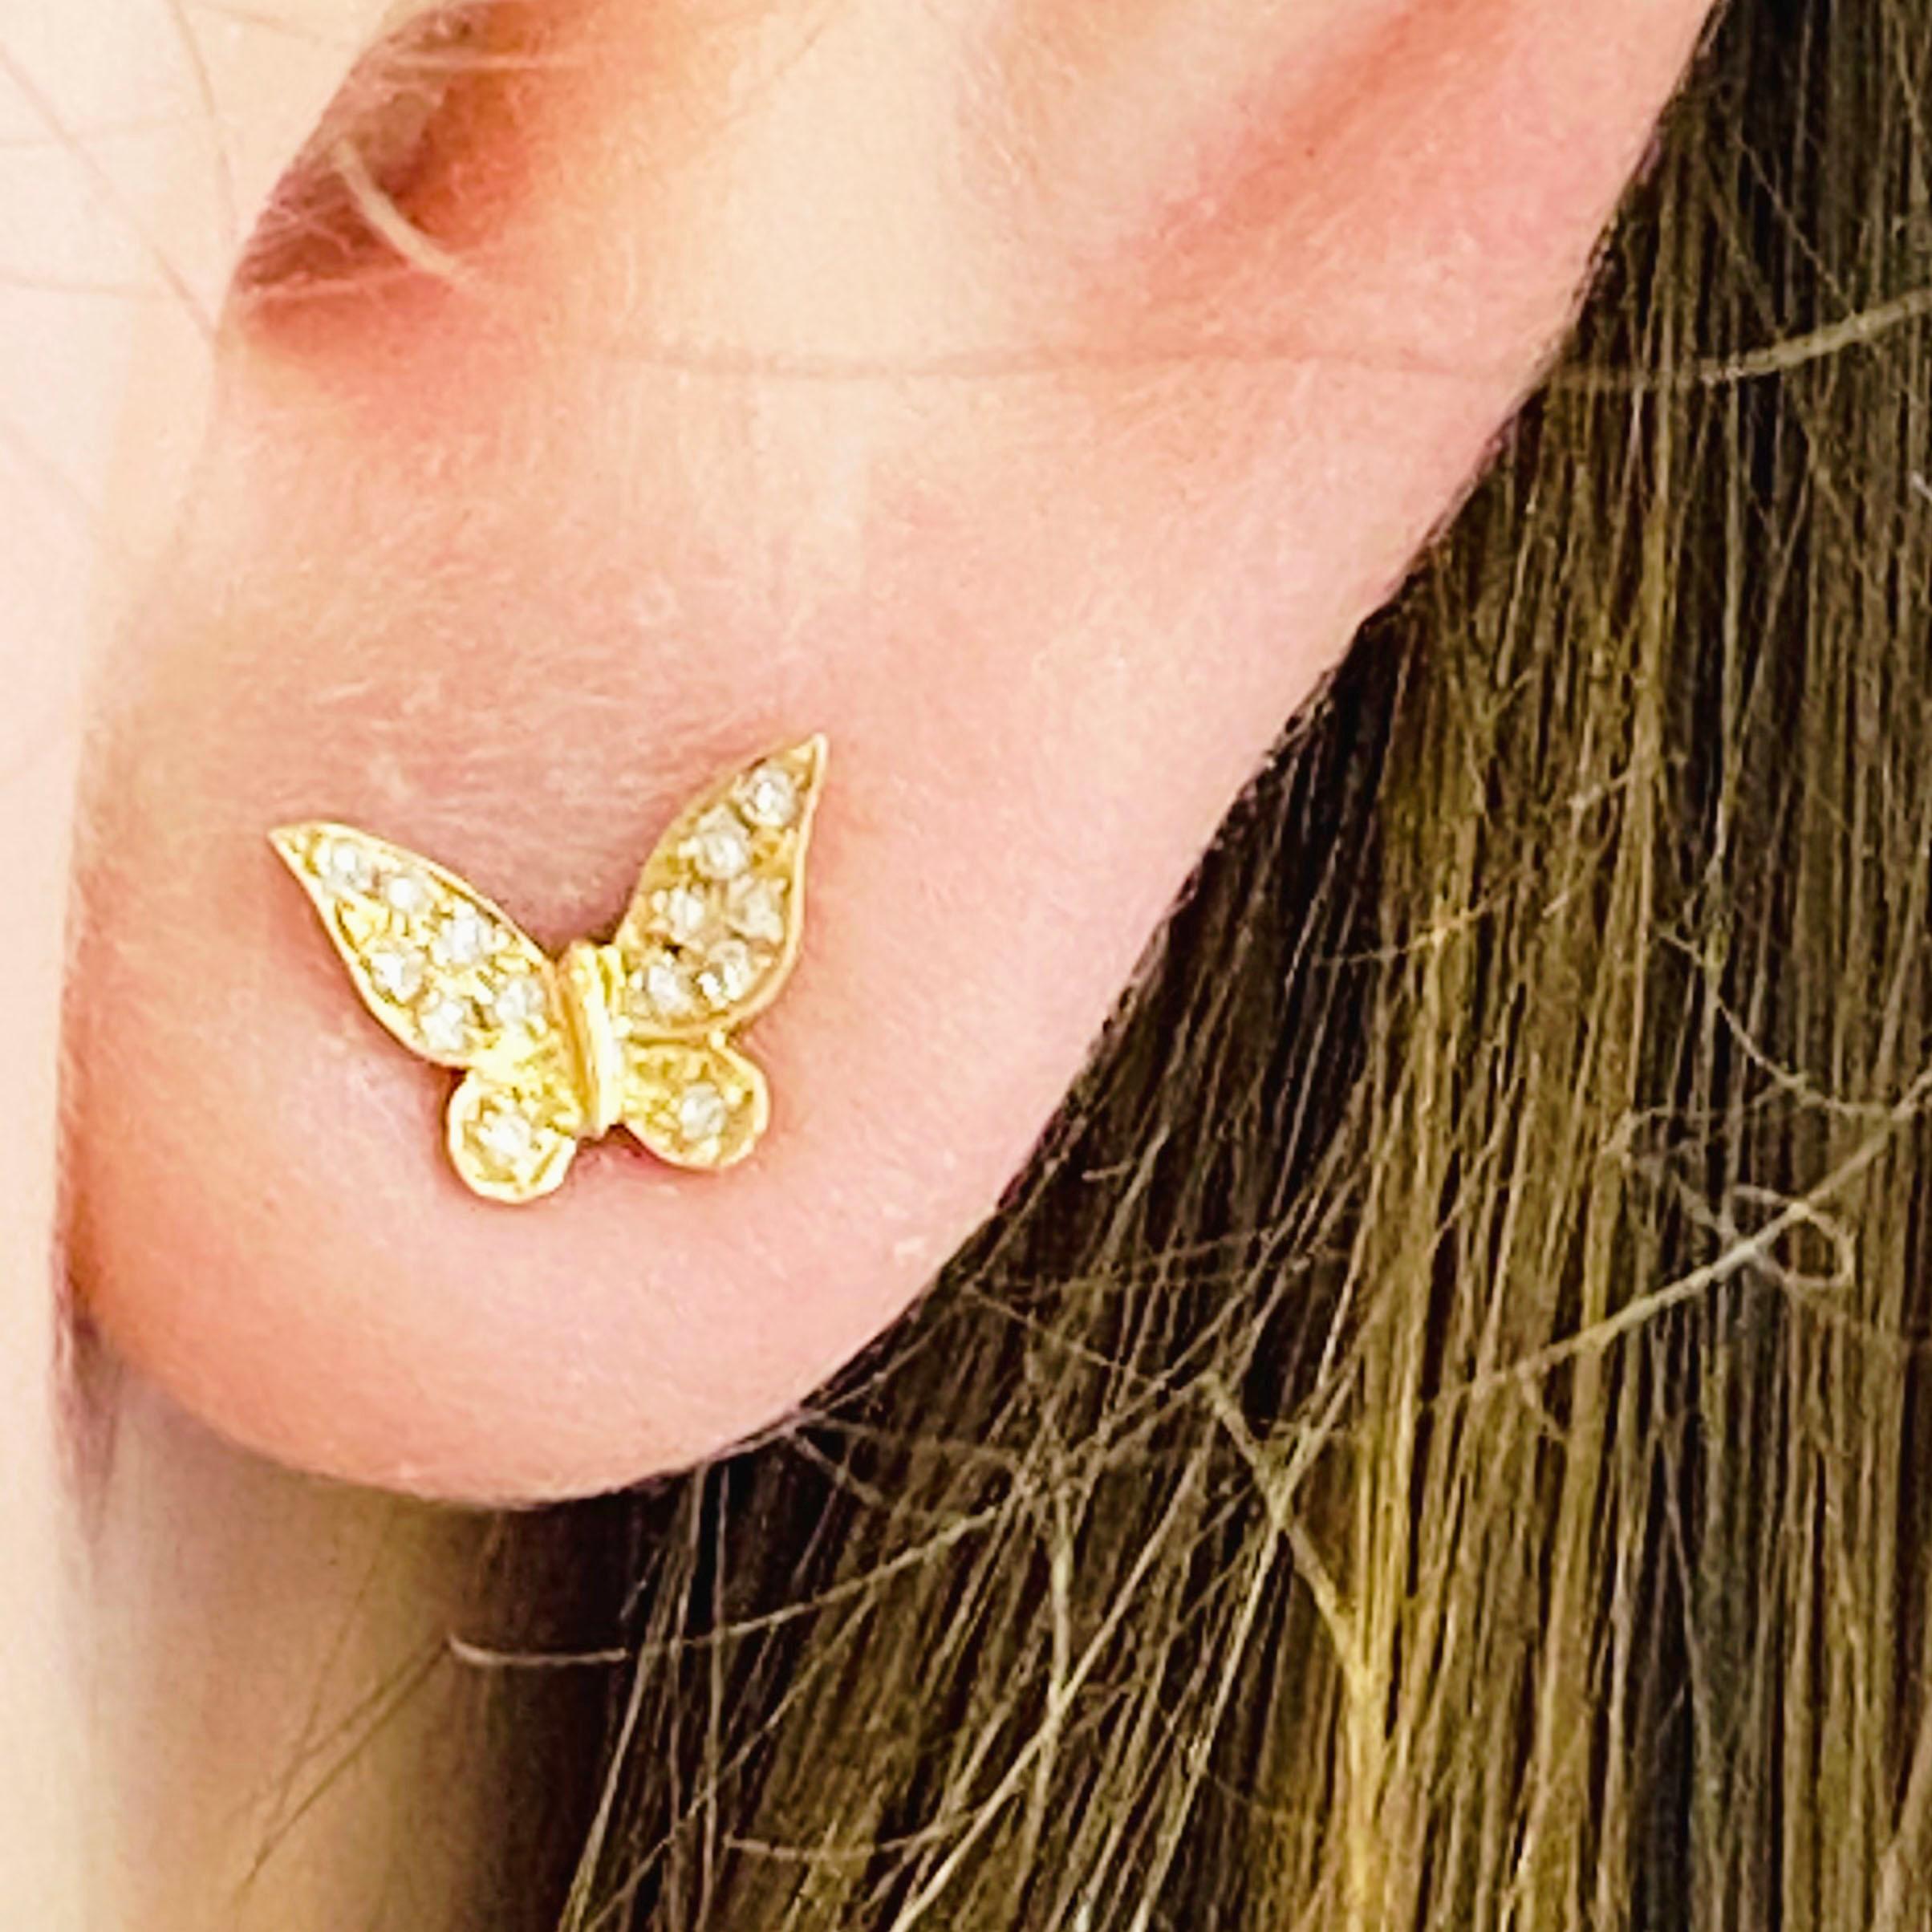 These stunning 14k yellow gold butterfly stud earrings dripping with diamonds provide a look that is both trendy and classic. These pave diamond earrings are a great staple to add to your collection, and can be worn with both casual and formal wear.